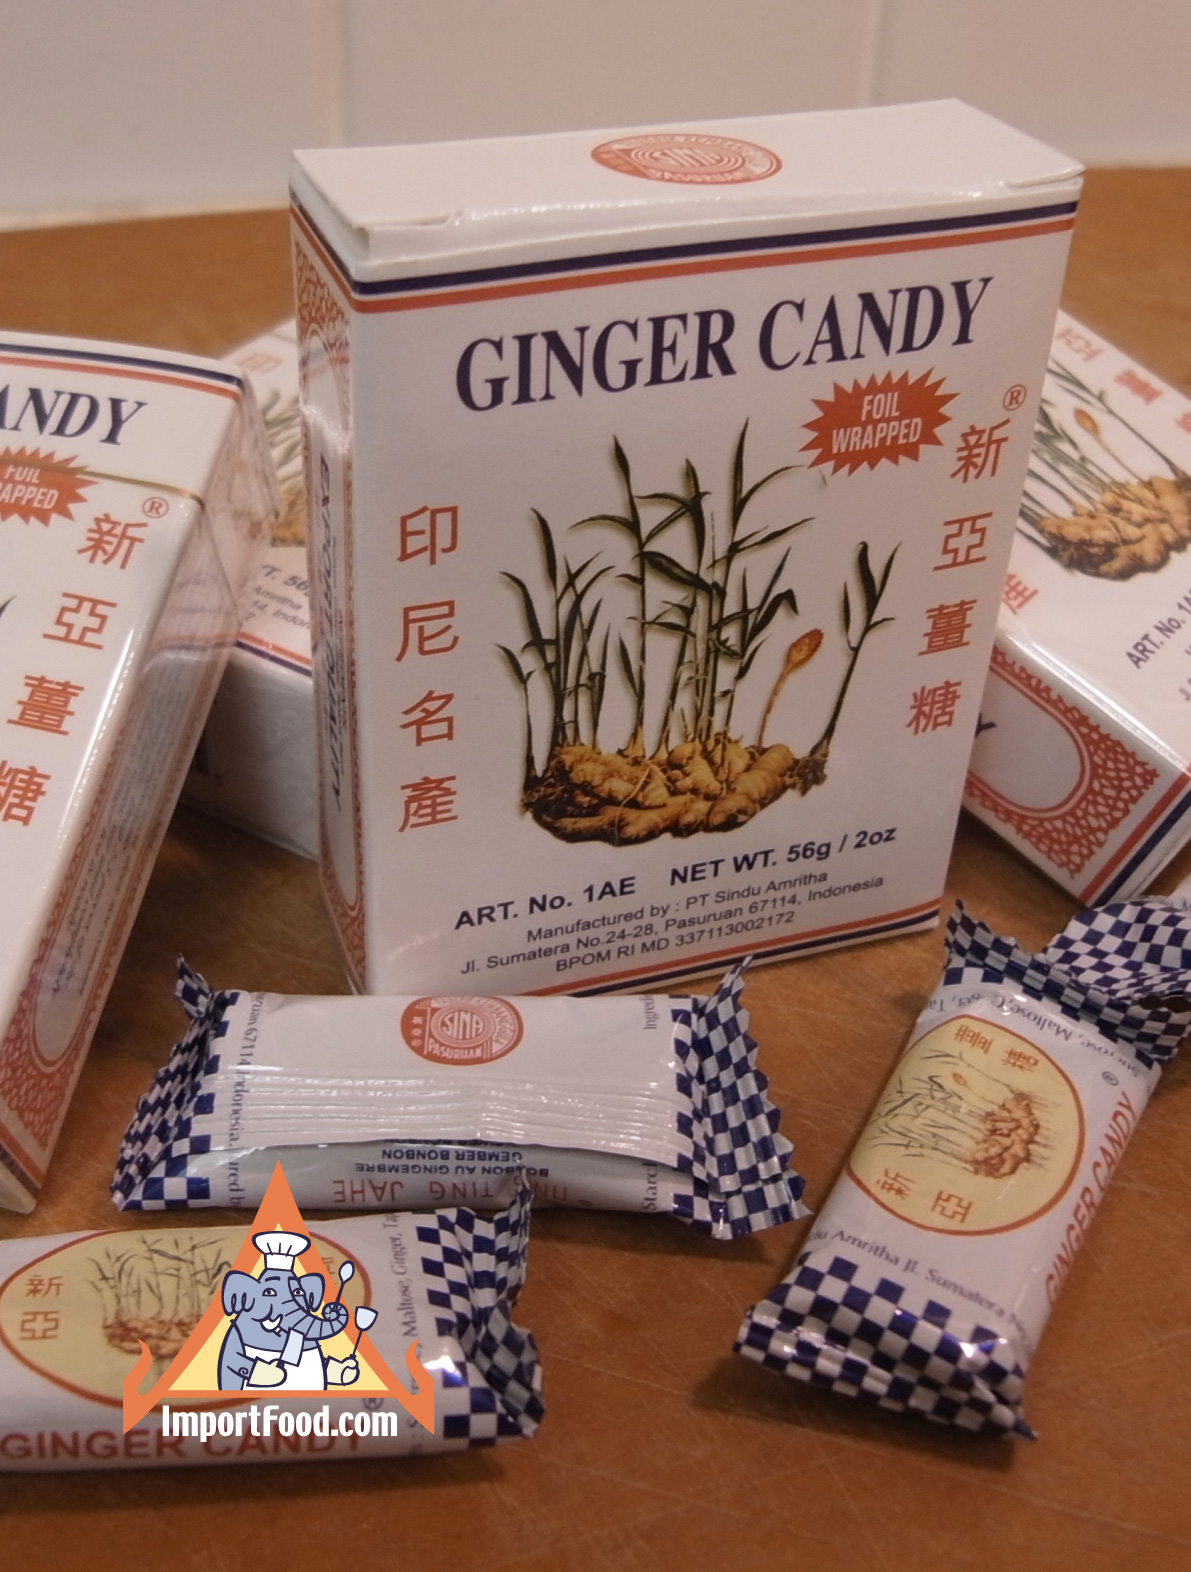 Ginger Candy, Ting Ting Jahe / Available online from ImportFood.com